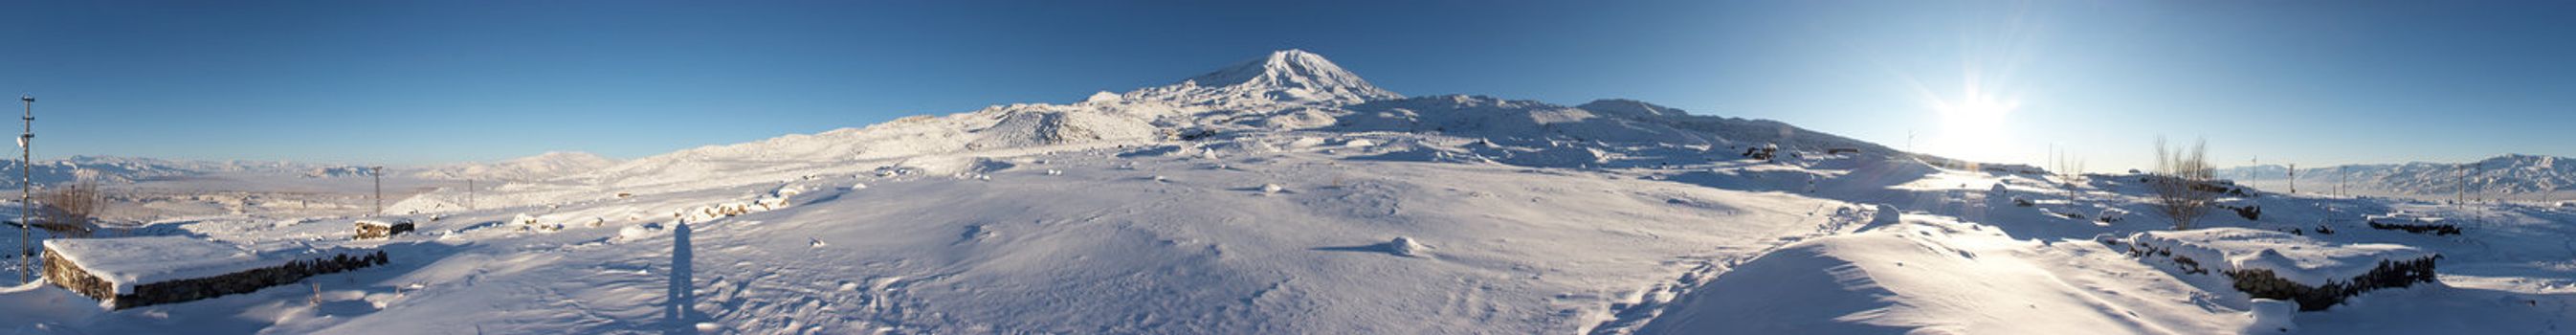 Mount Ararat (Agri Dagi) in winter. Panoramic image was shot from abandoned Elikoy village, altitude 2250m. Mount Ararat is an inactive volcano located near Iranian and Armenian borders and the tallest peak in Turkey.